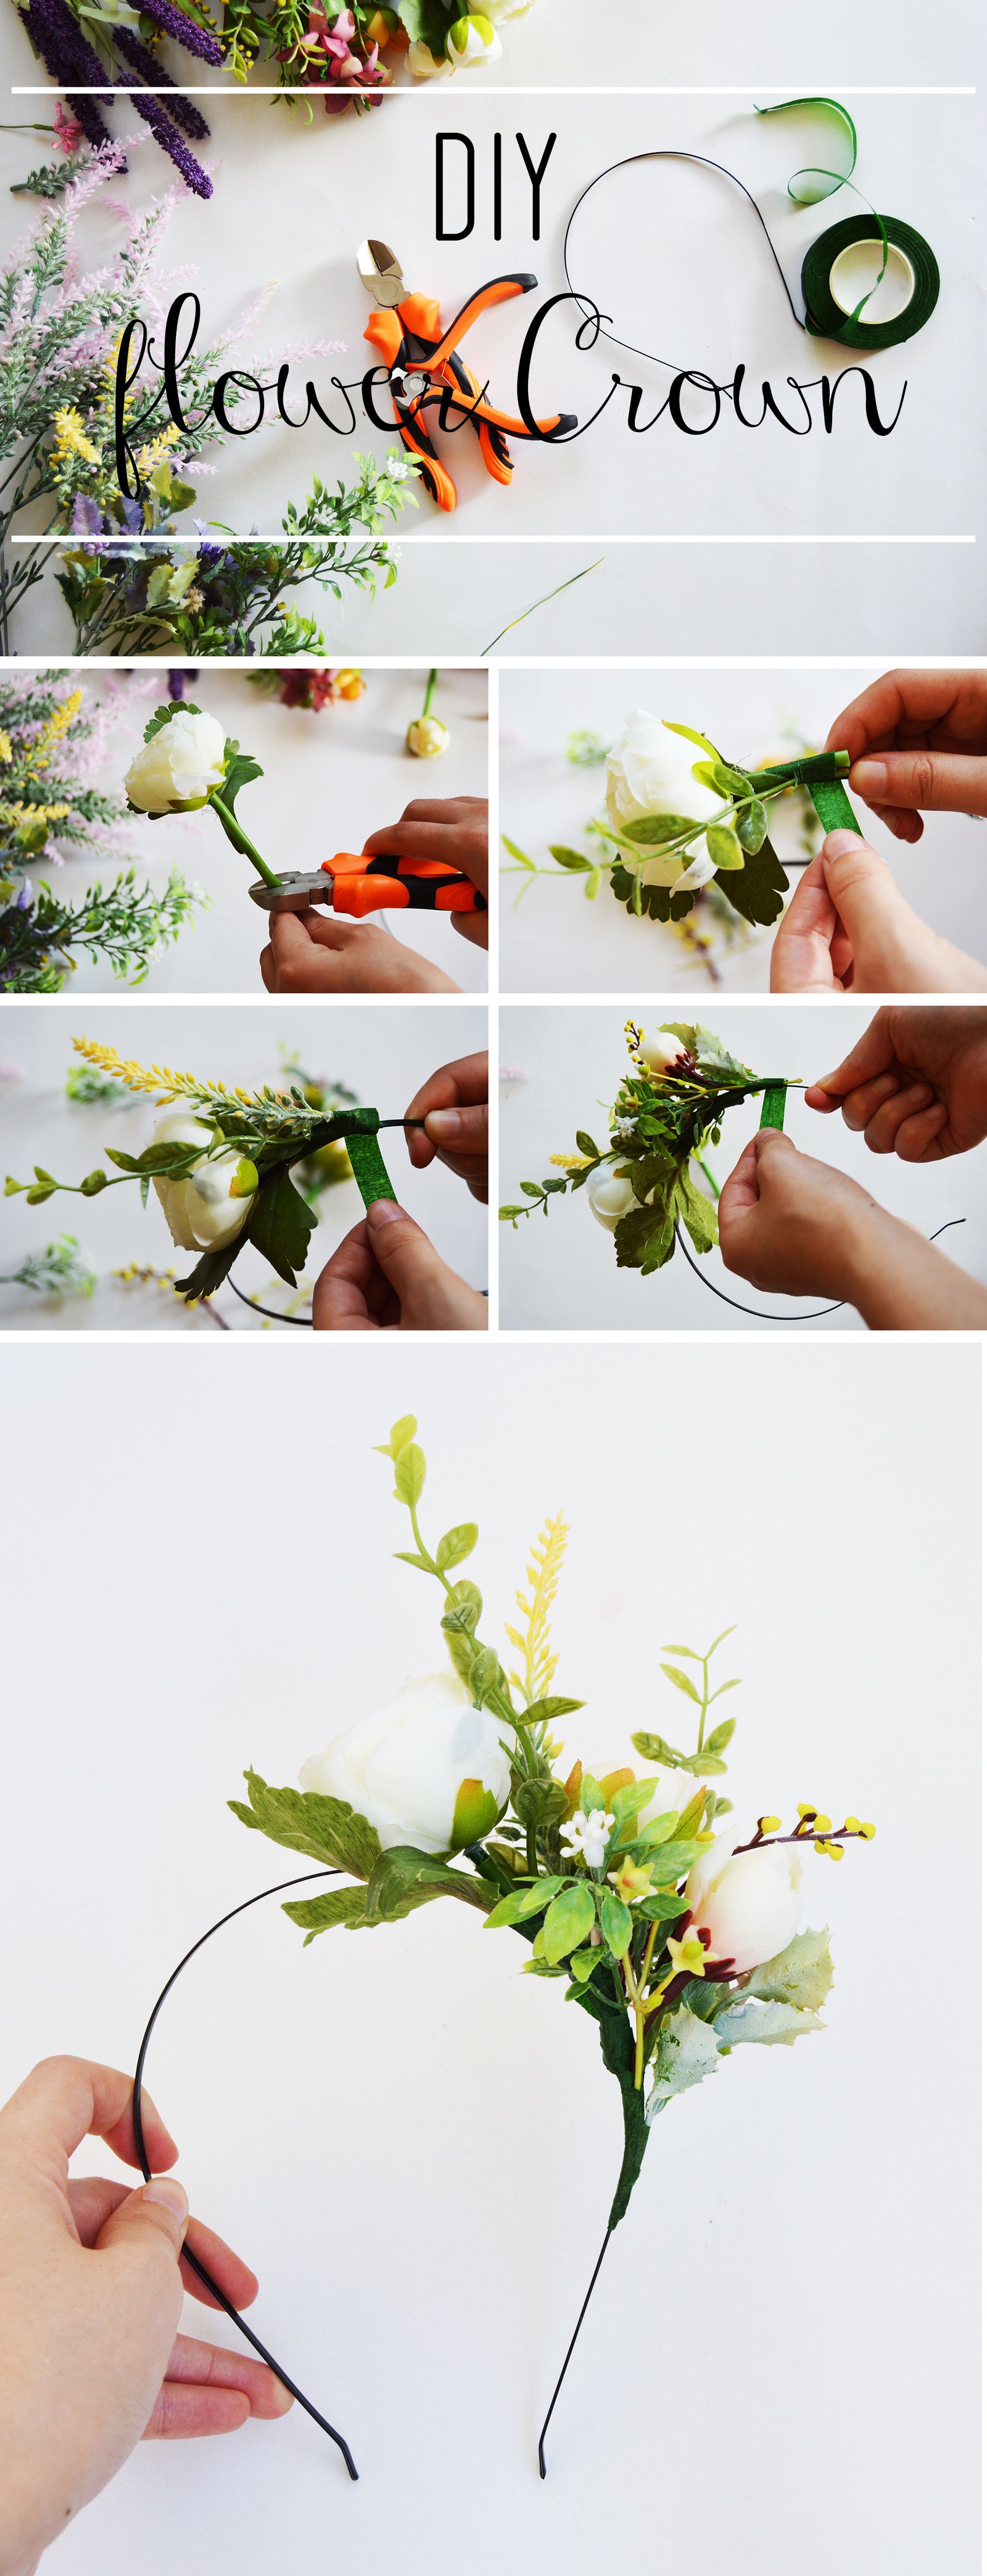 DIY Flower crown - Learn how to make your own flower crown